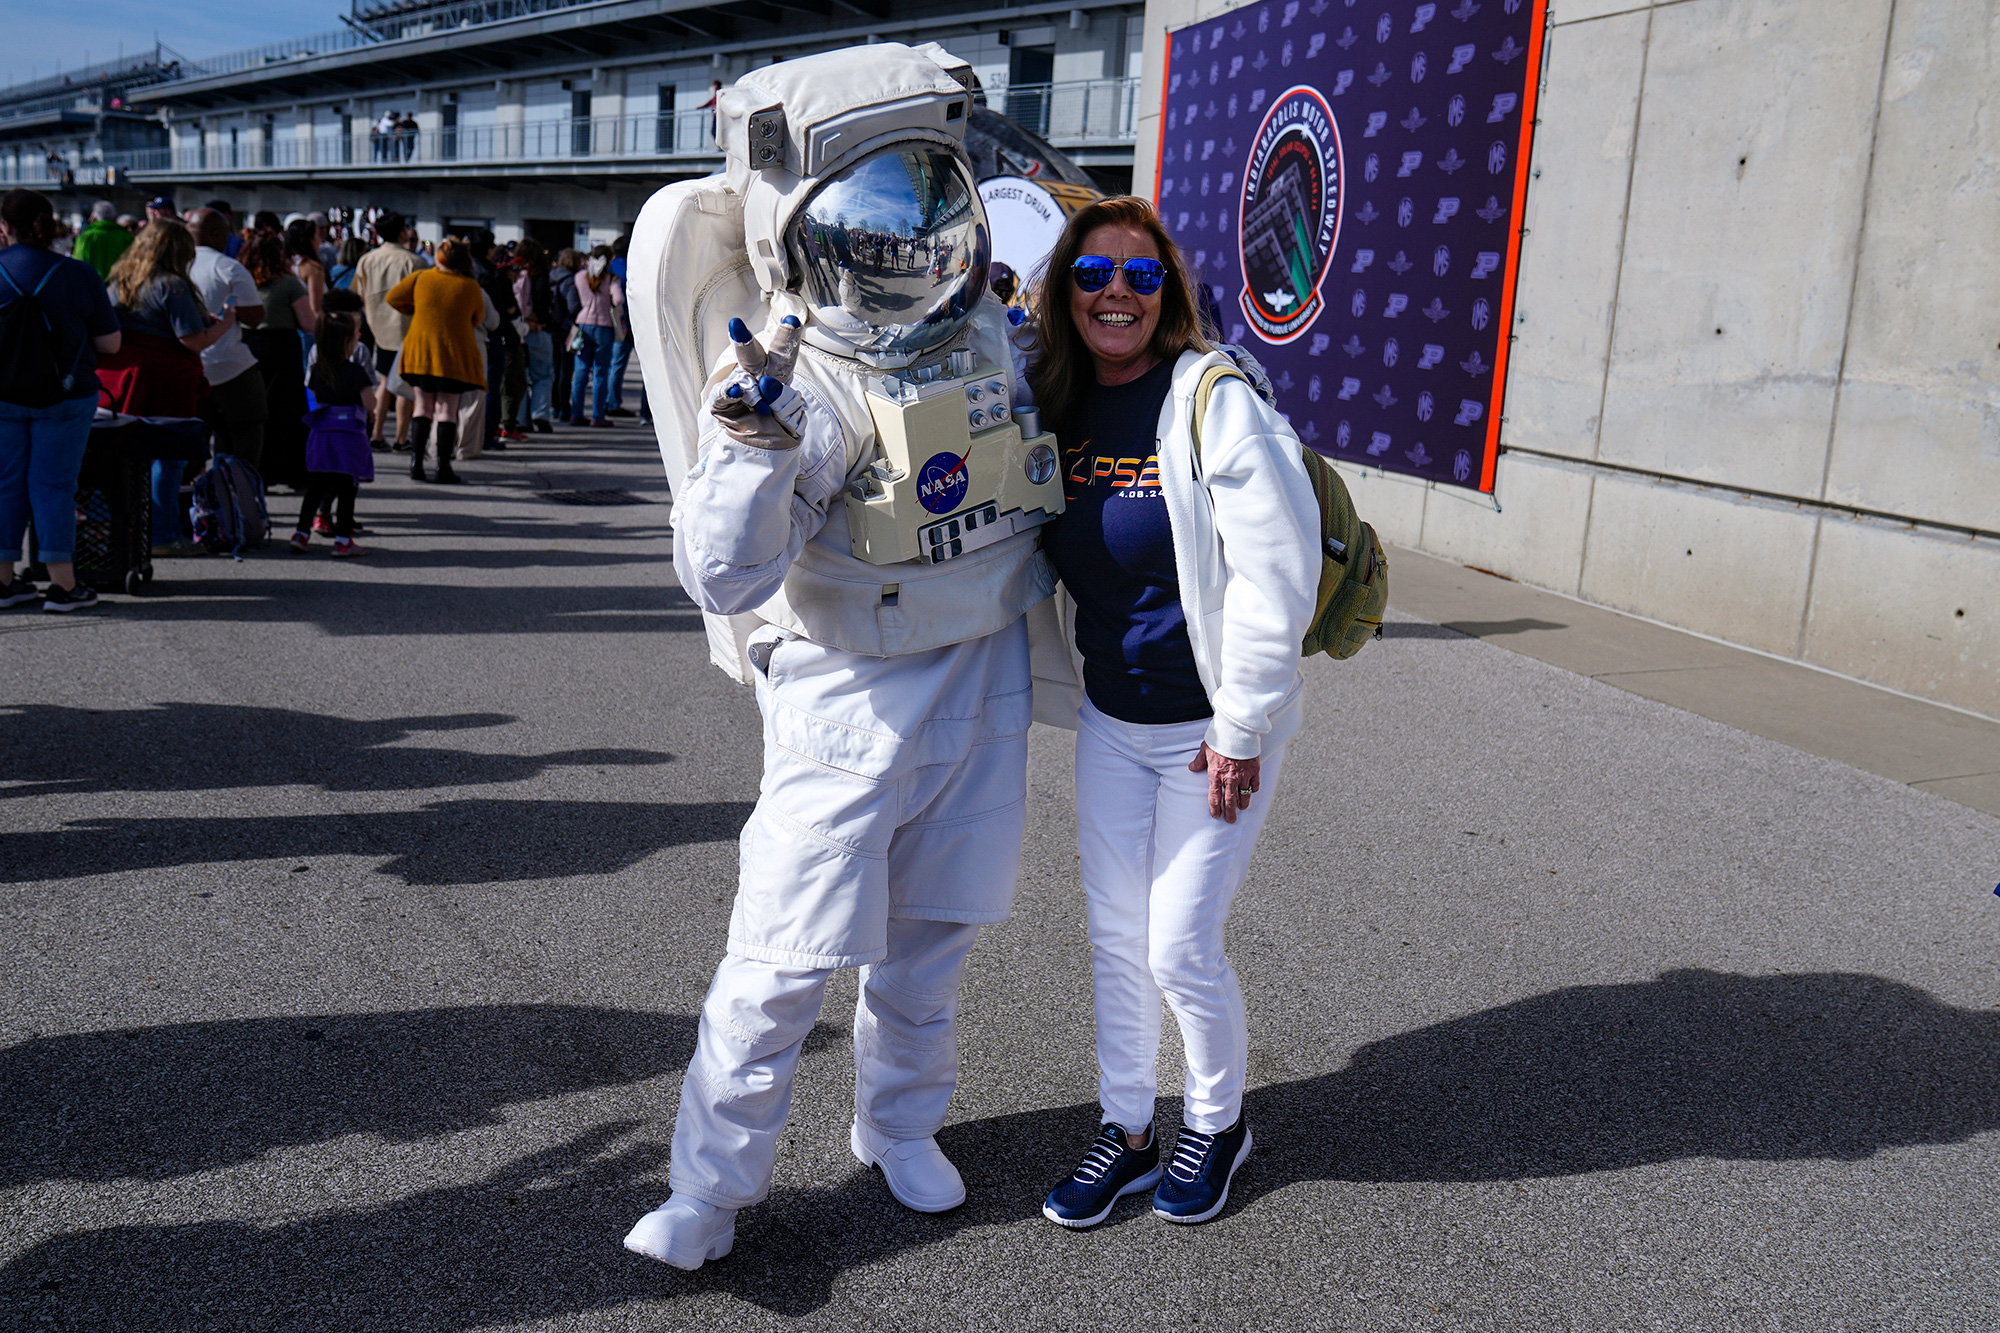 Tamra Sylvester poses with a person dressed as an astronaut during a eclipse viewing event at the Indianapolis Motor Speedway.